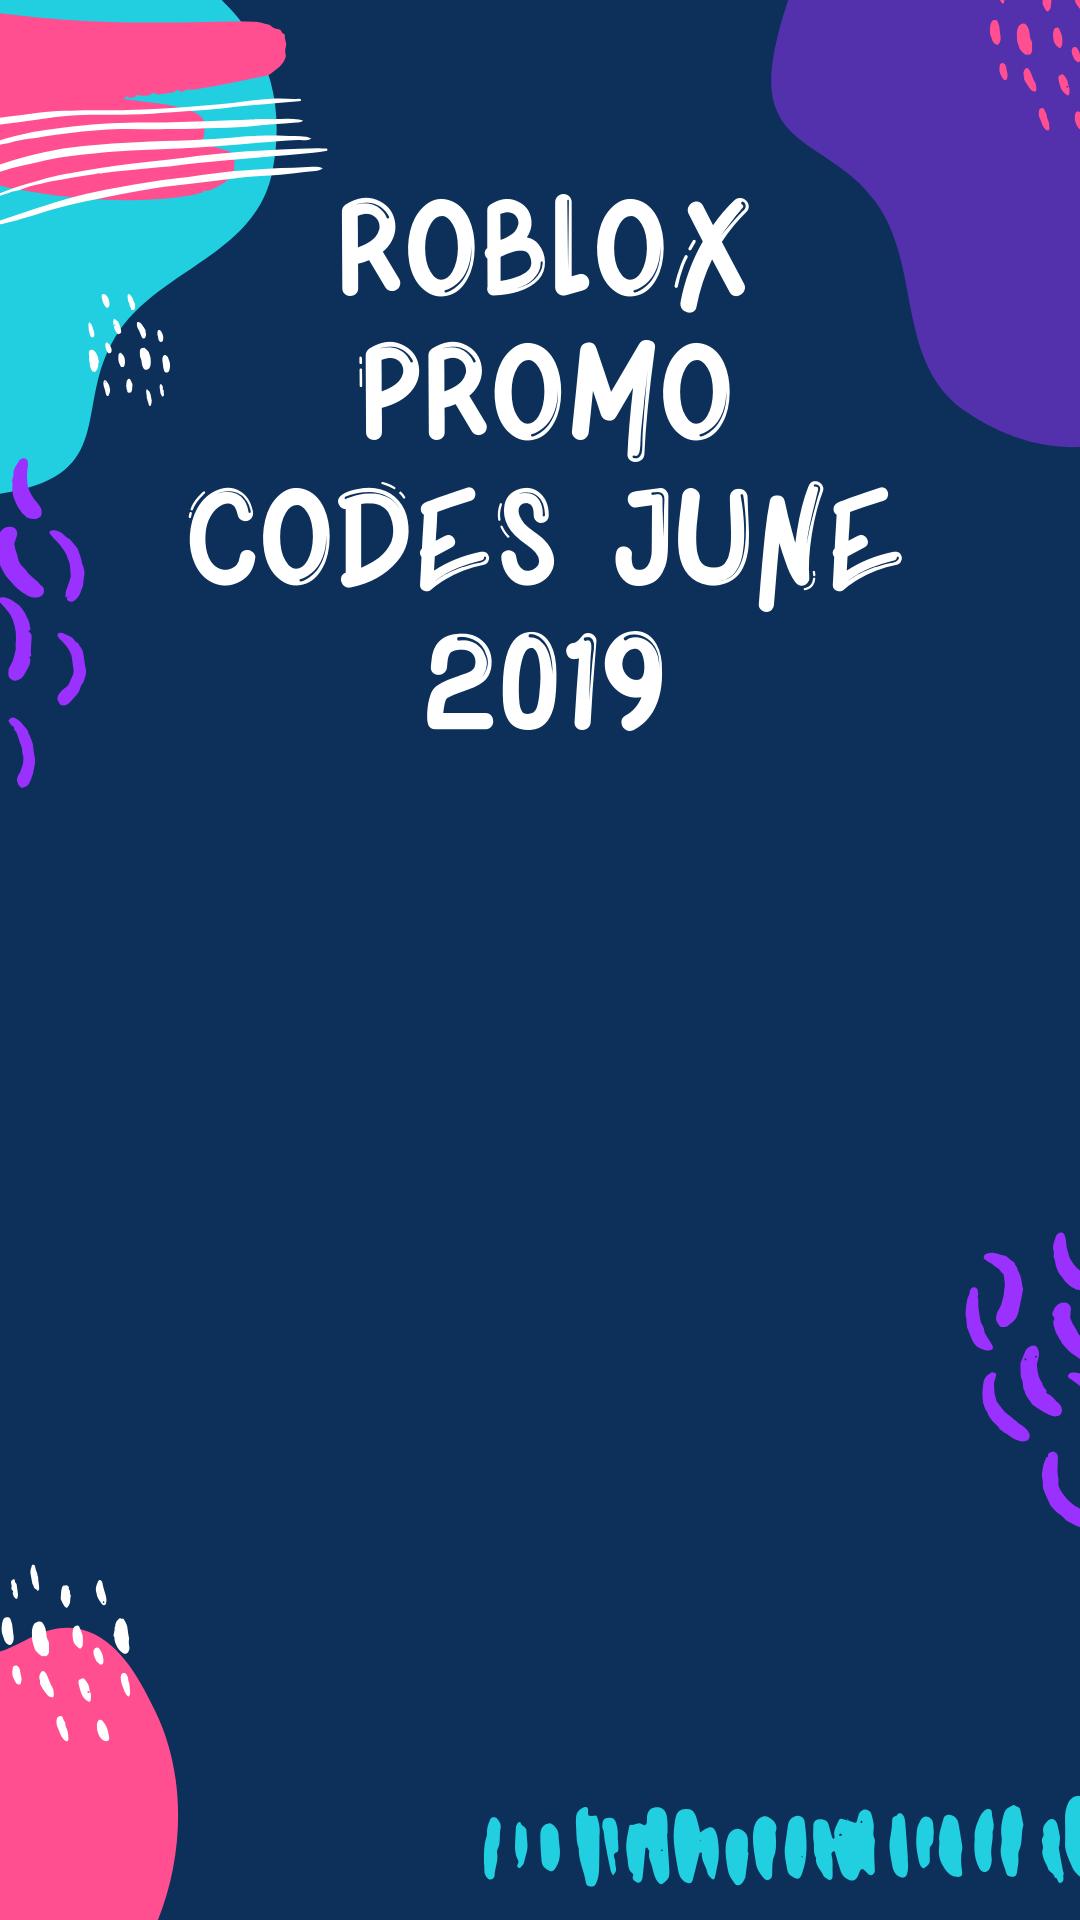 Roblox Promo Codes 2020 On Twitter Roblox Working Promo Code June 2019 Spider Cola Just Enter Promo Code Spidercola Click Here To Get All New Roblox Promo Codes Today S Link Https T Co Co1ltinps5 Robloxnew - roblox promo code 2019 june